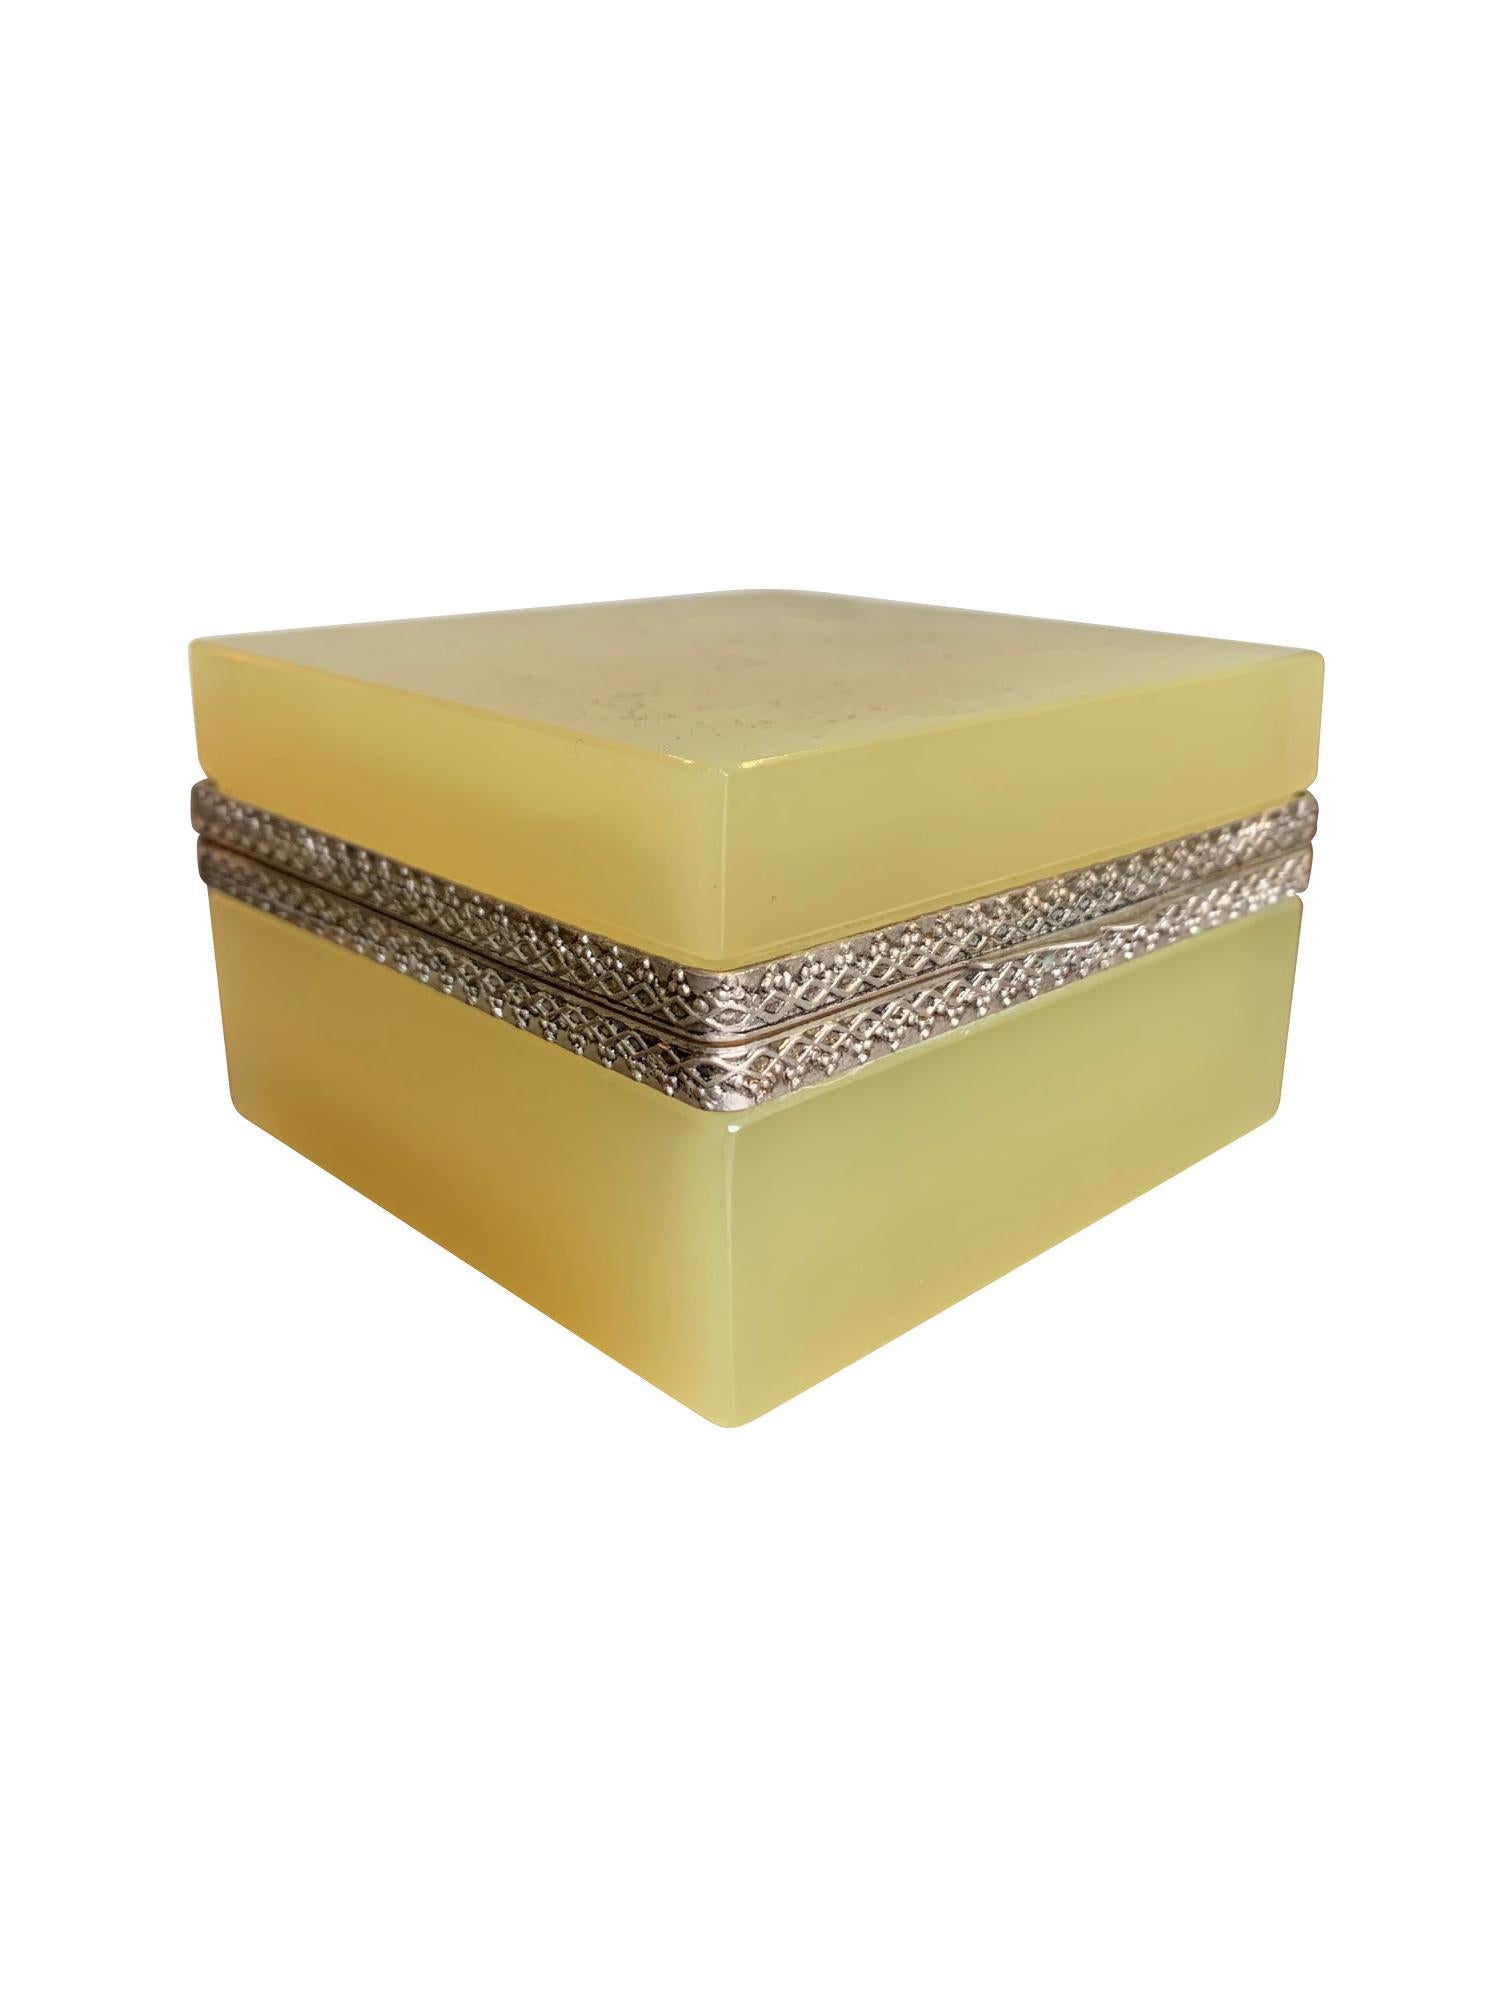 A lovely yellow Murano glass hinged jewelry box by Giovanni Cendese, Murano, Italy with silvered central detailed collar and hinge. 

 